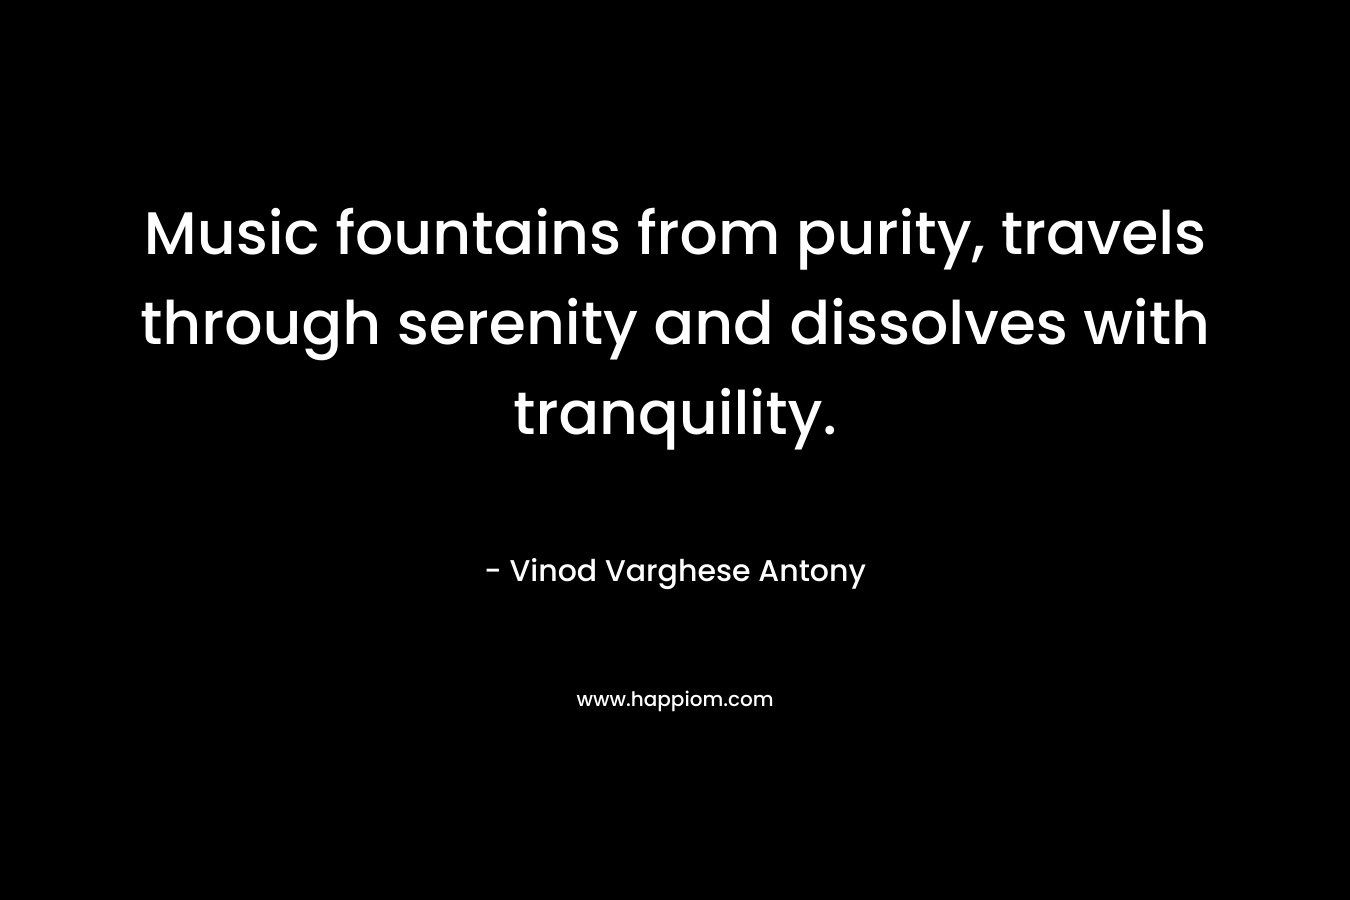 Music fountains from purity, travels through serenity and dissolves with tranquility. – Vinod Varghese Antony